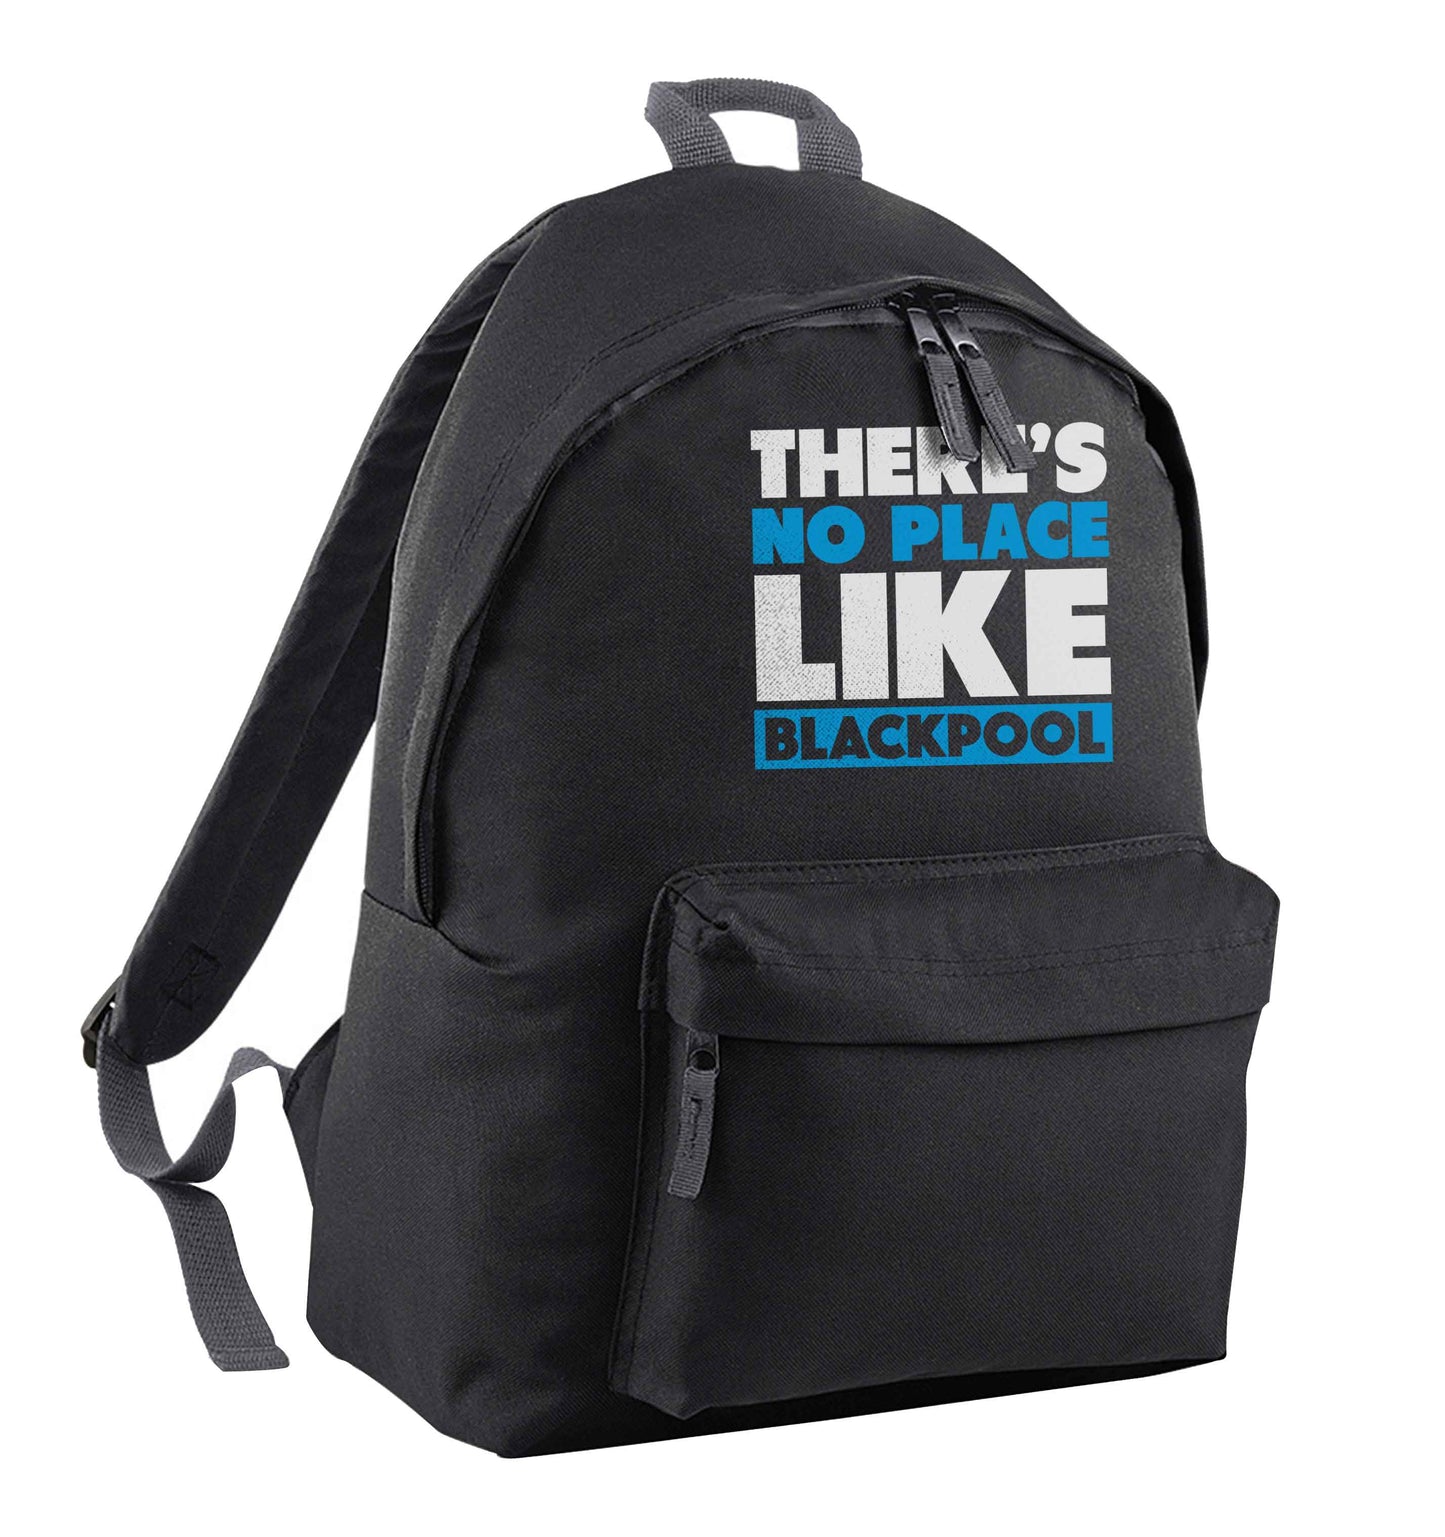 There's no place like Blackpool black adults backpack